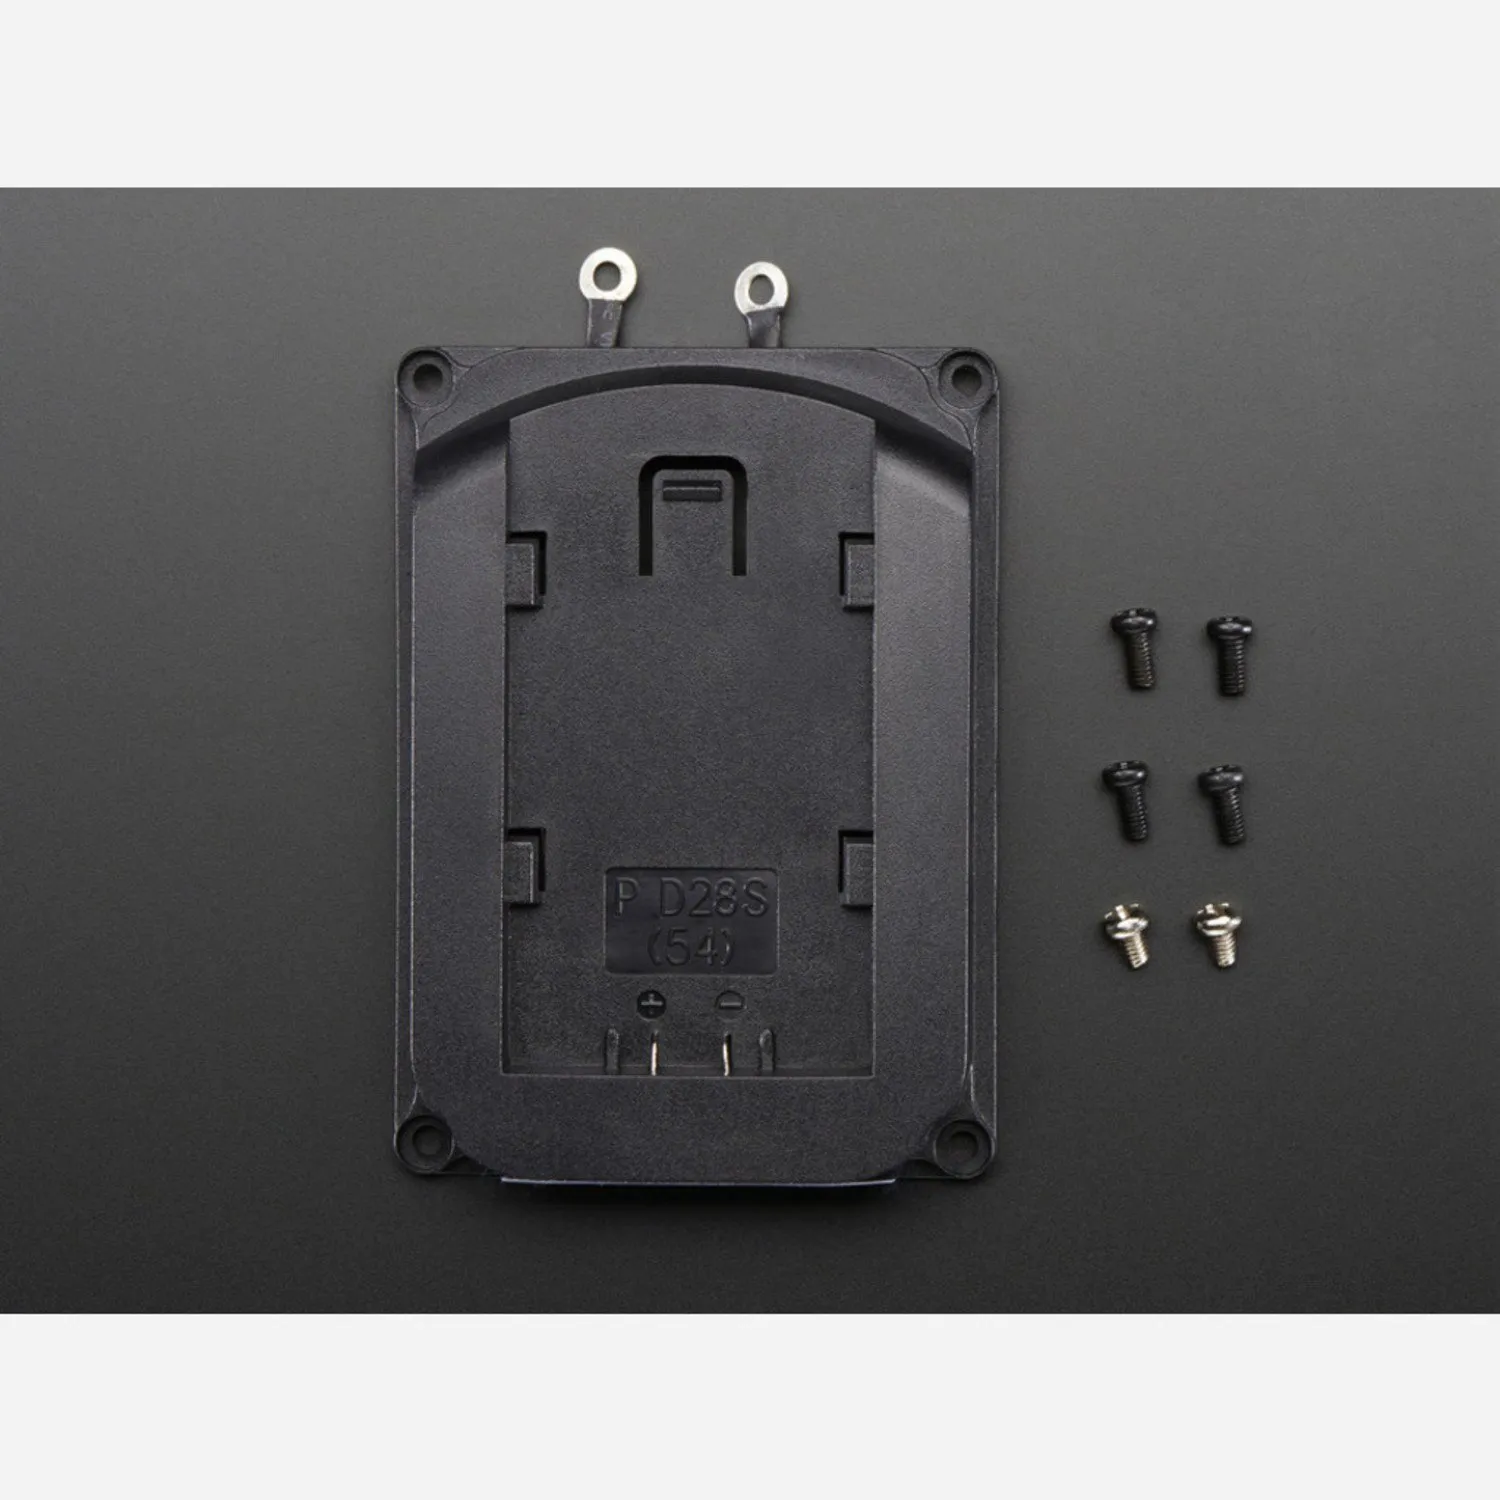 Photo of Camcorder Battery Holder for Panasonic CGR-D28 and CGA-D54s